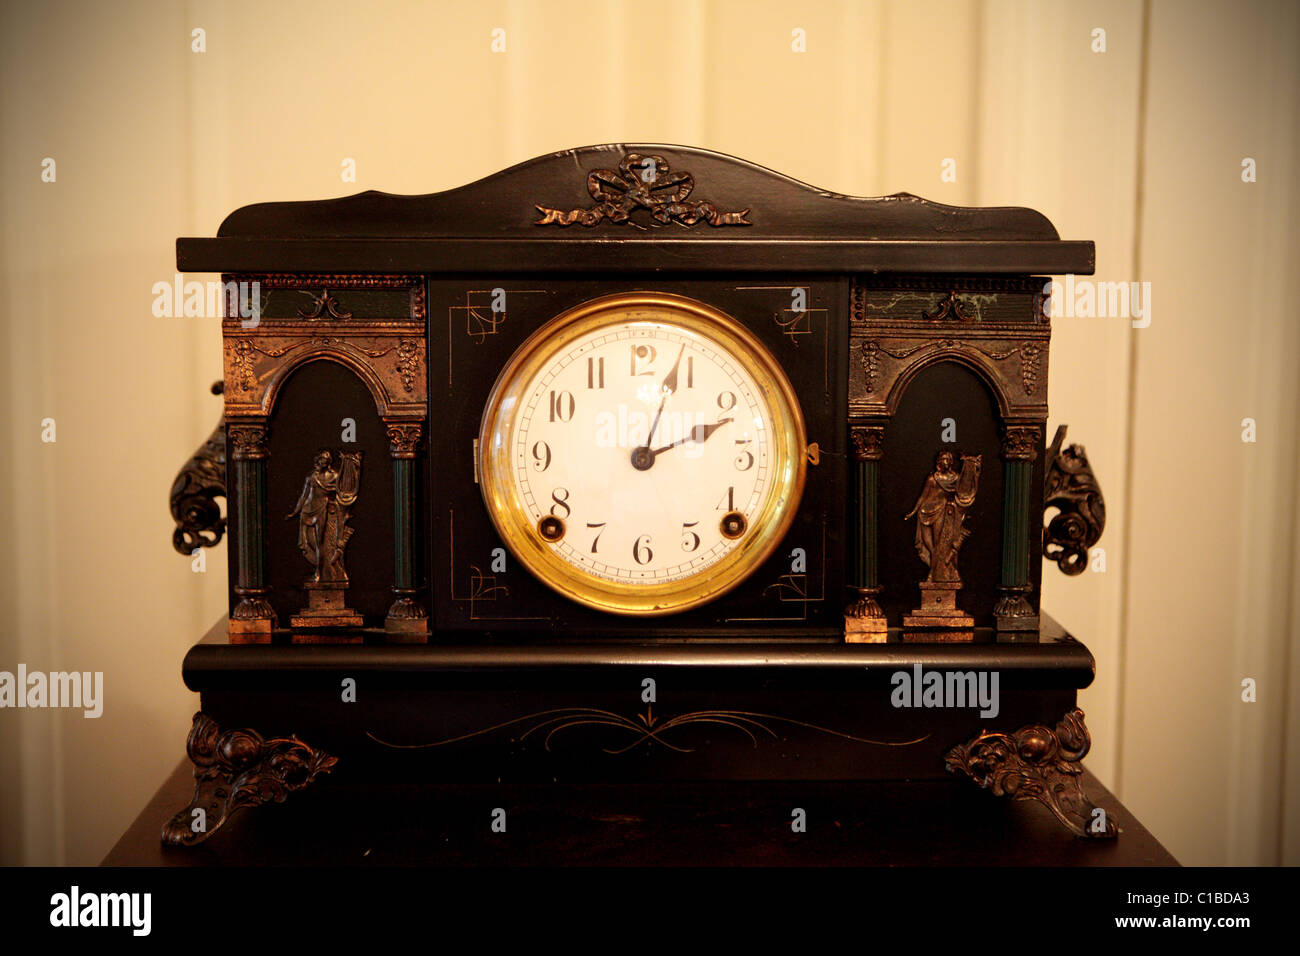 ANCIENT OLD HISTORIC AMERICAN CLOCK ANTIQUE Stock Photo